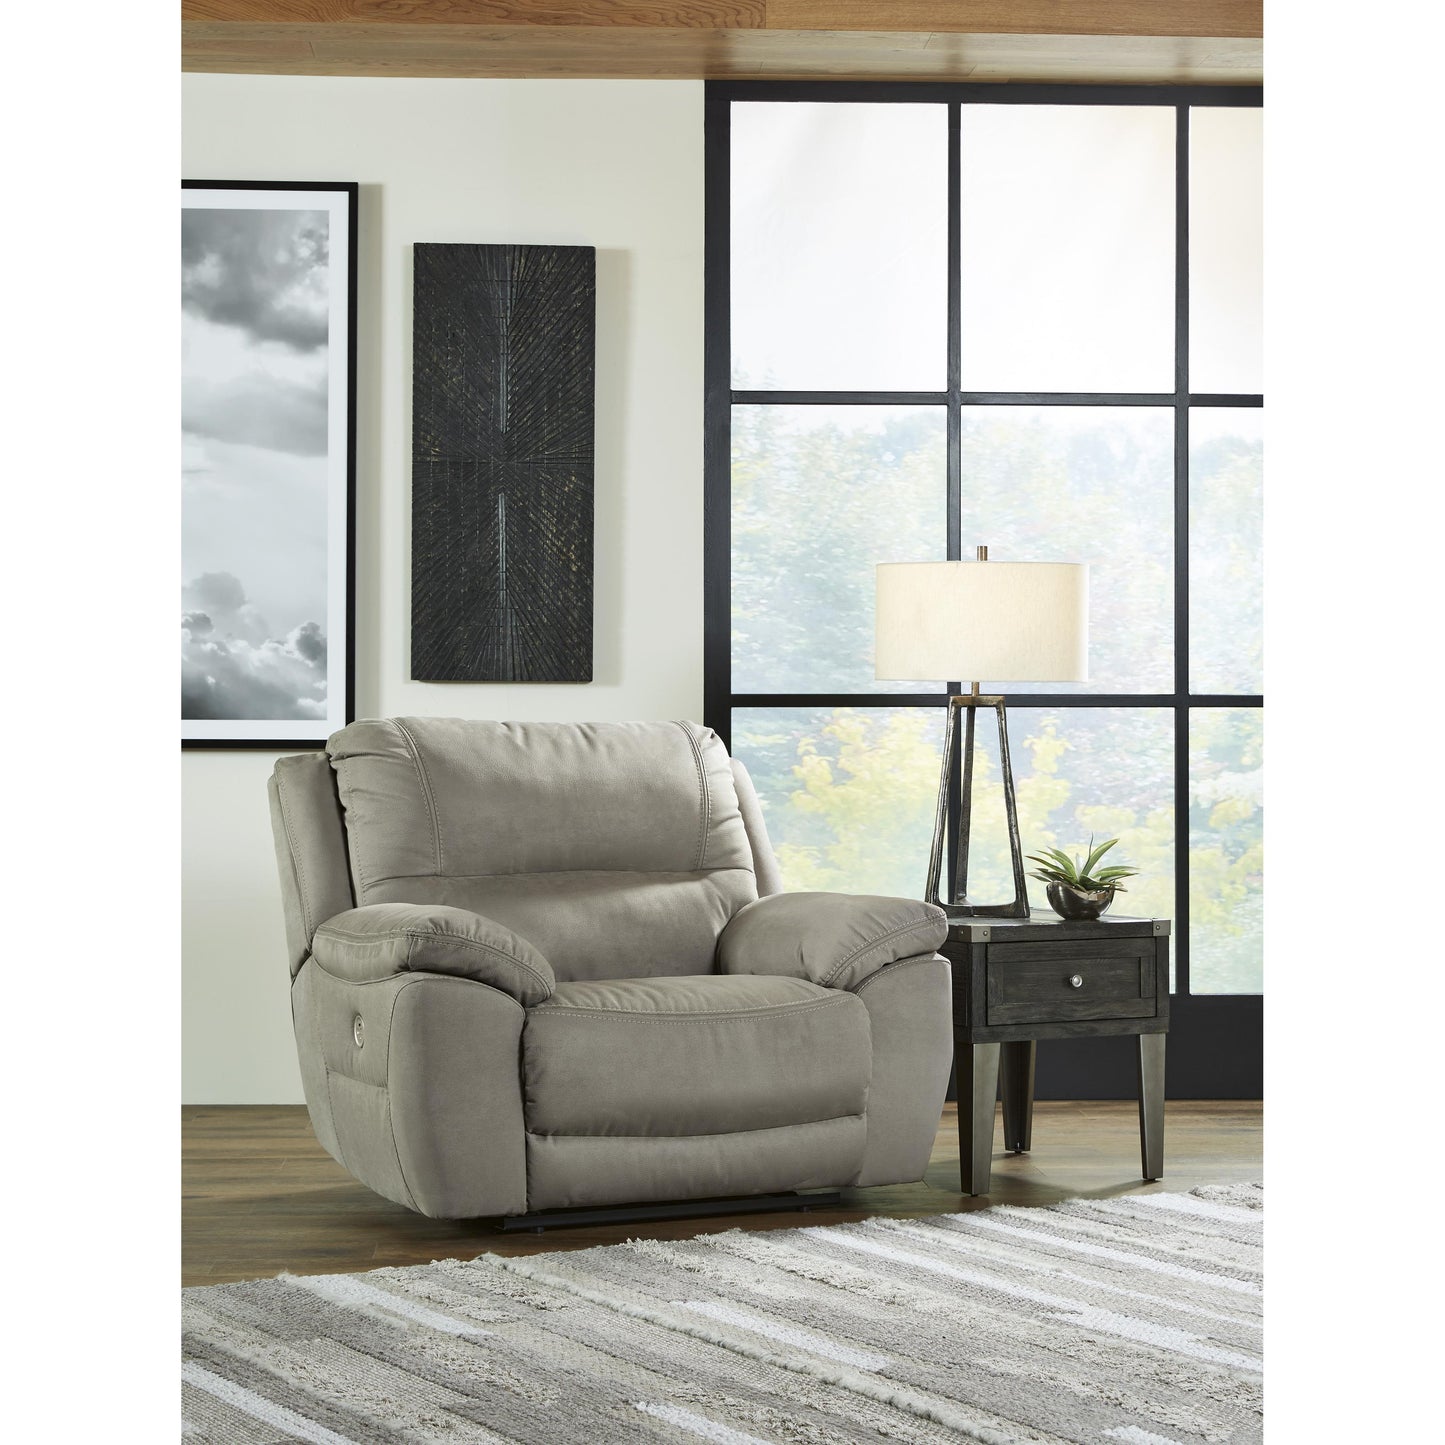 Signature Design by Ashley Next-Gen Gaucho Power Leather Look Recliner with Wall Recline 5420382 IMAGE 6